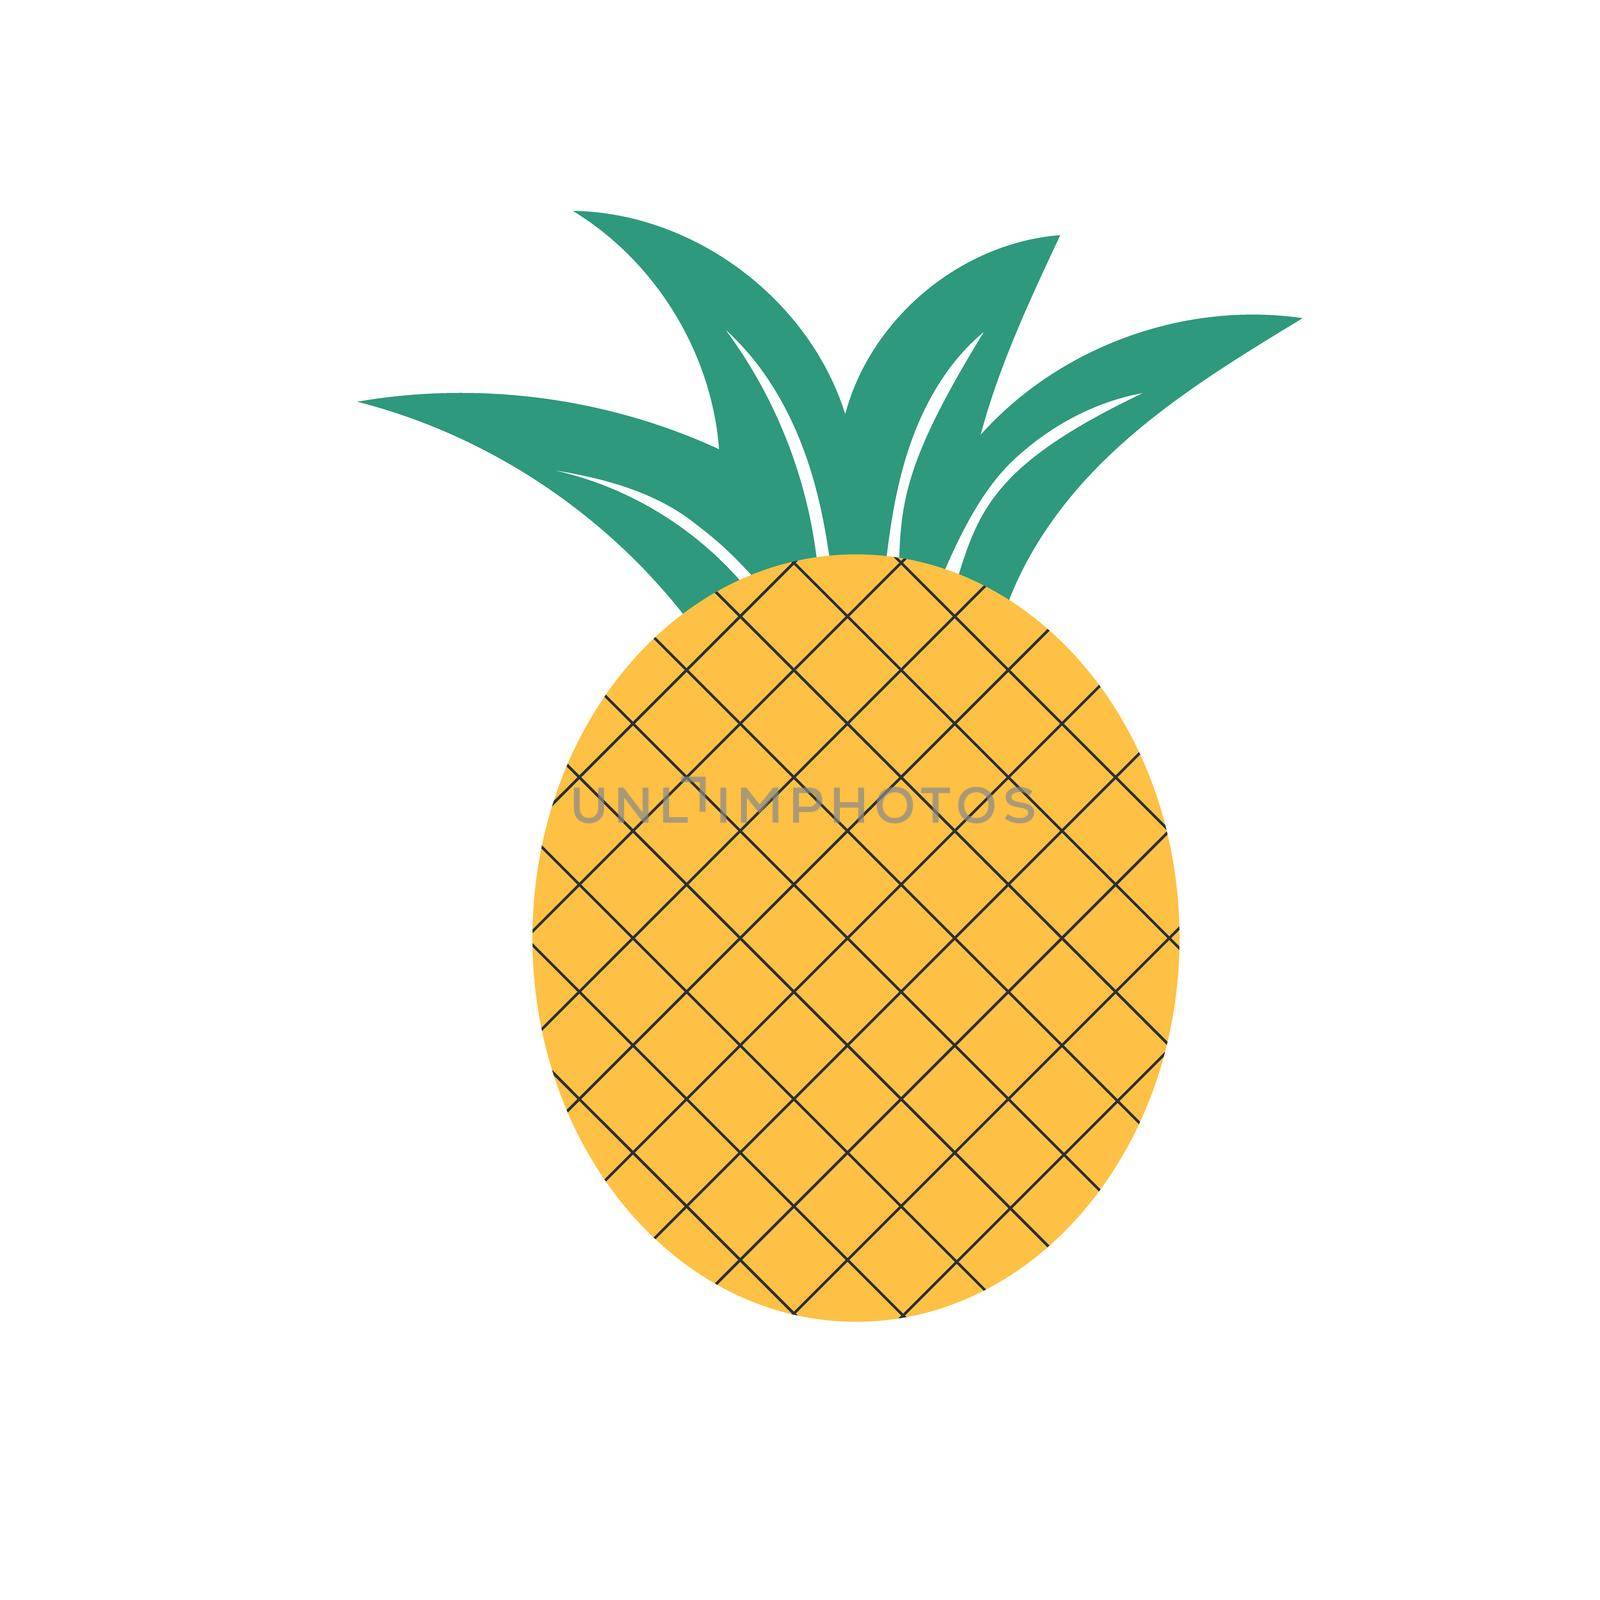 Modern vector pineapple illustration. Pineapple icon on white. Pineapple logo on isolated background. Hand drawn design style.